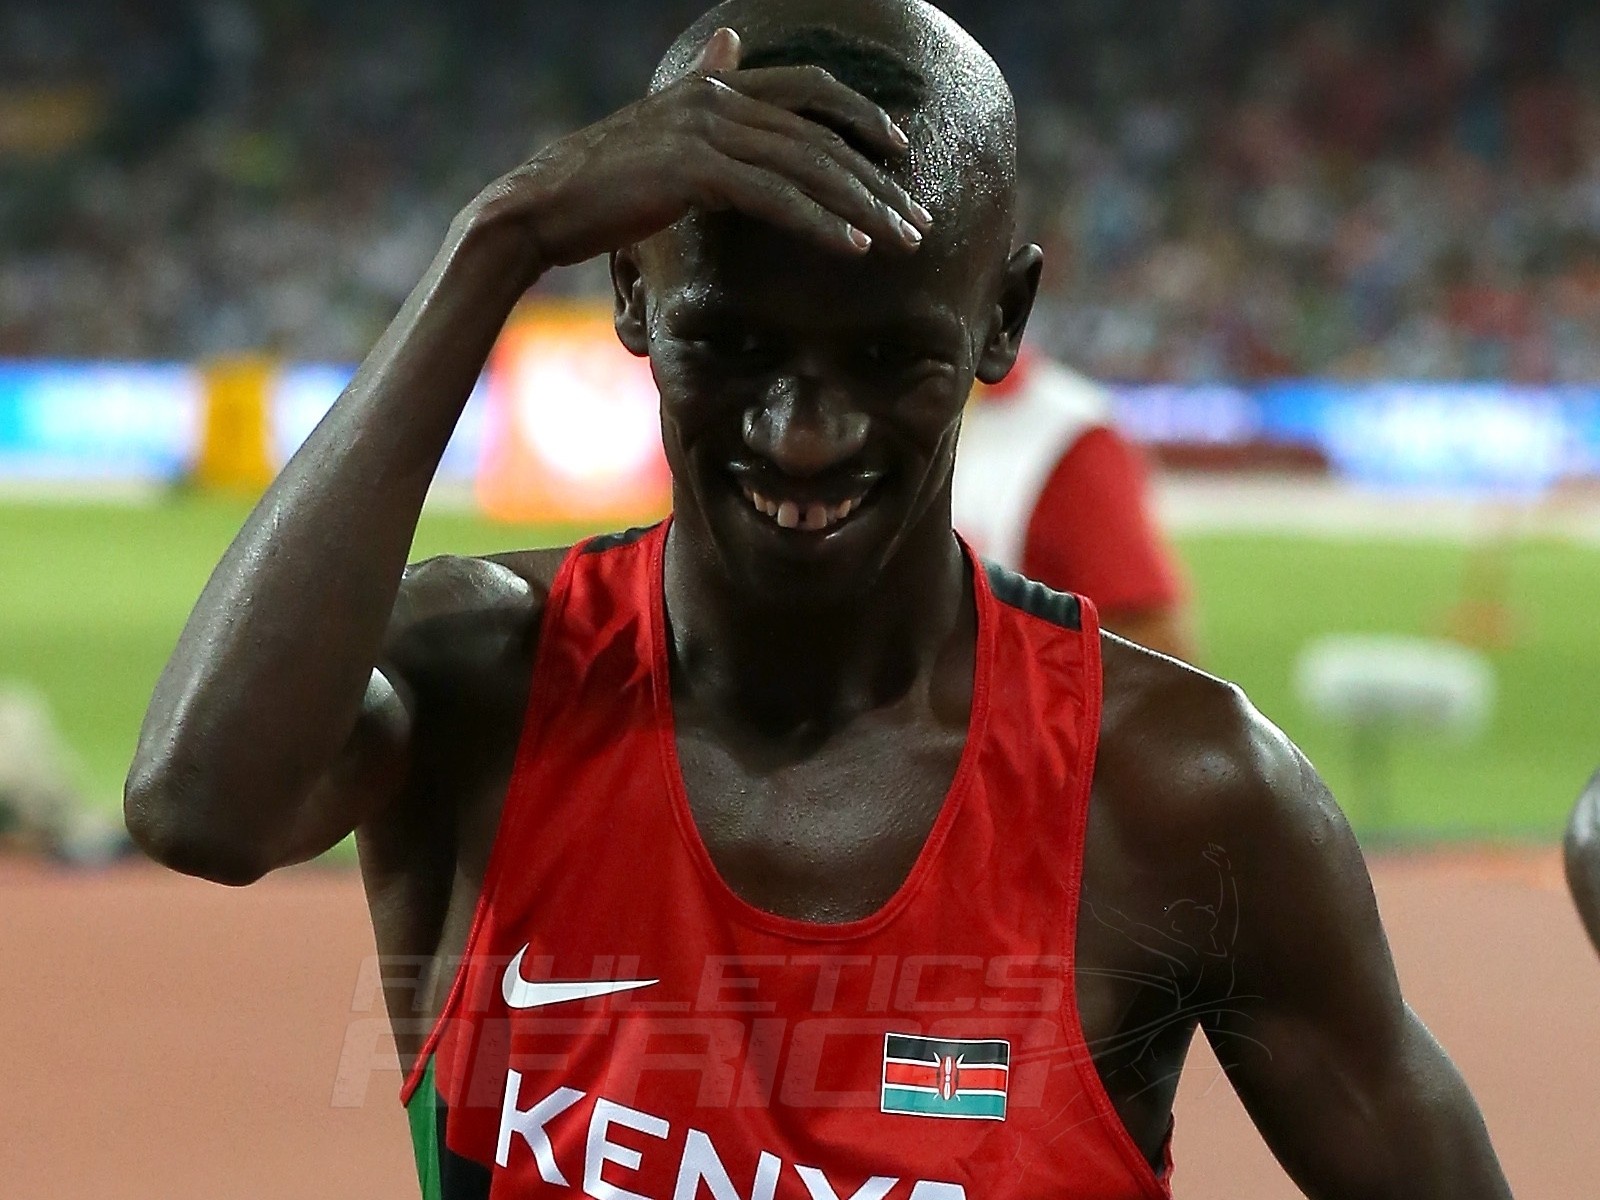 Ezekiel Kemboi of Kenya dances after winning win gold in the Men's 3000m steeplechase final on Day 3 of the 15th IAAF World Athletics Championships Beijing 2015 at Beijing National Stadium on August 24, 2015 in Beijing, China. (Photo by Lintao Zhang/Getty Images for IAAF)